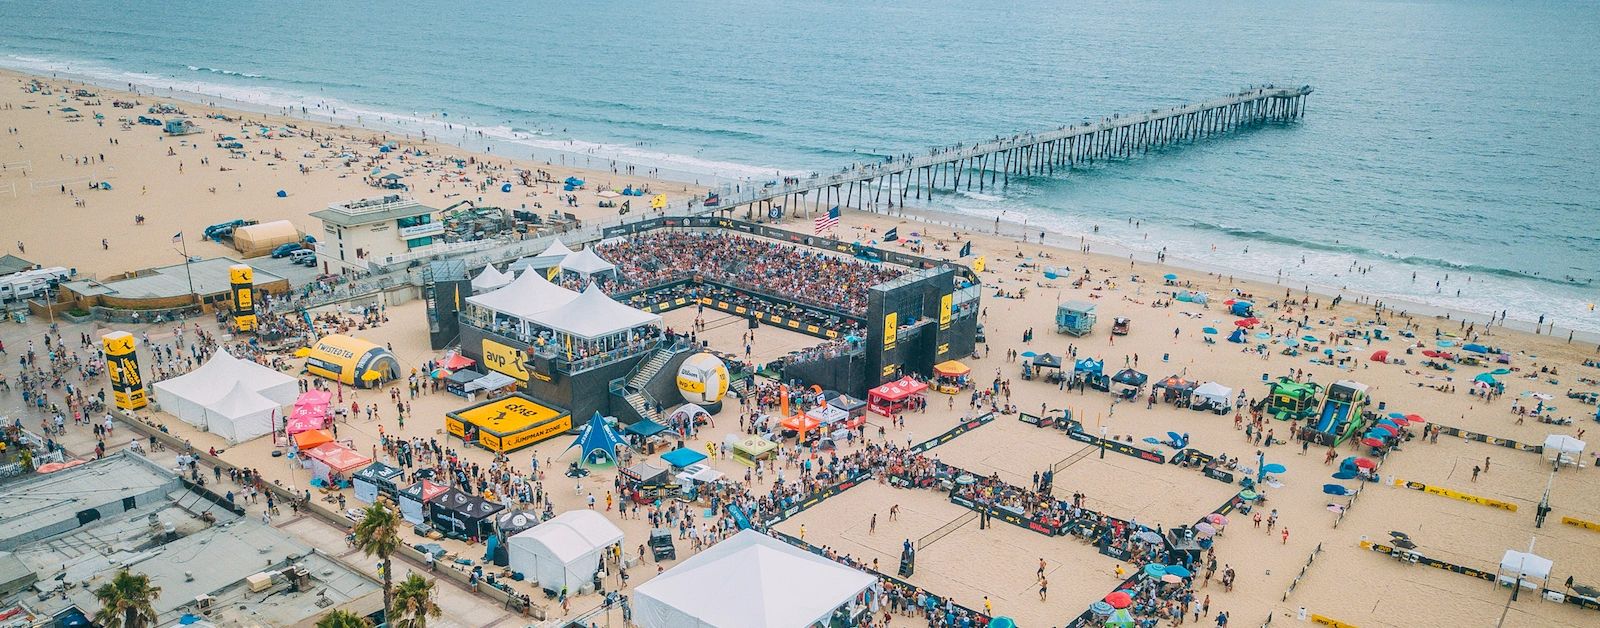 An AVP Beach Volleyball event taking place in Los Angeles, California. 